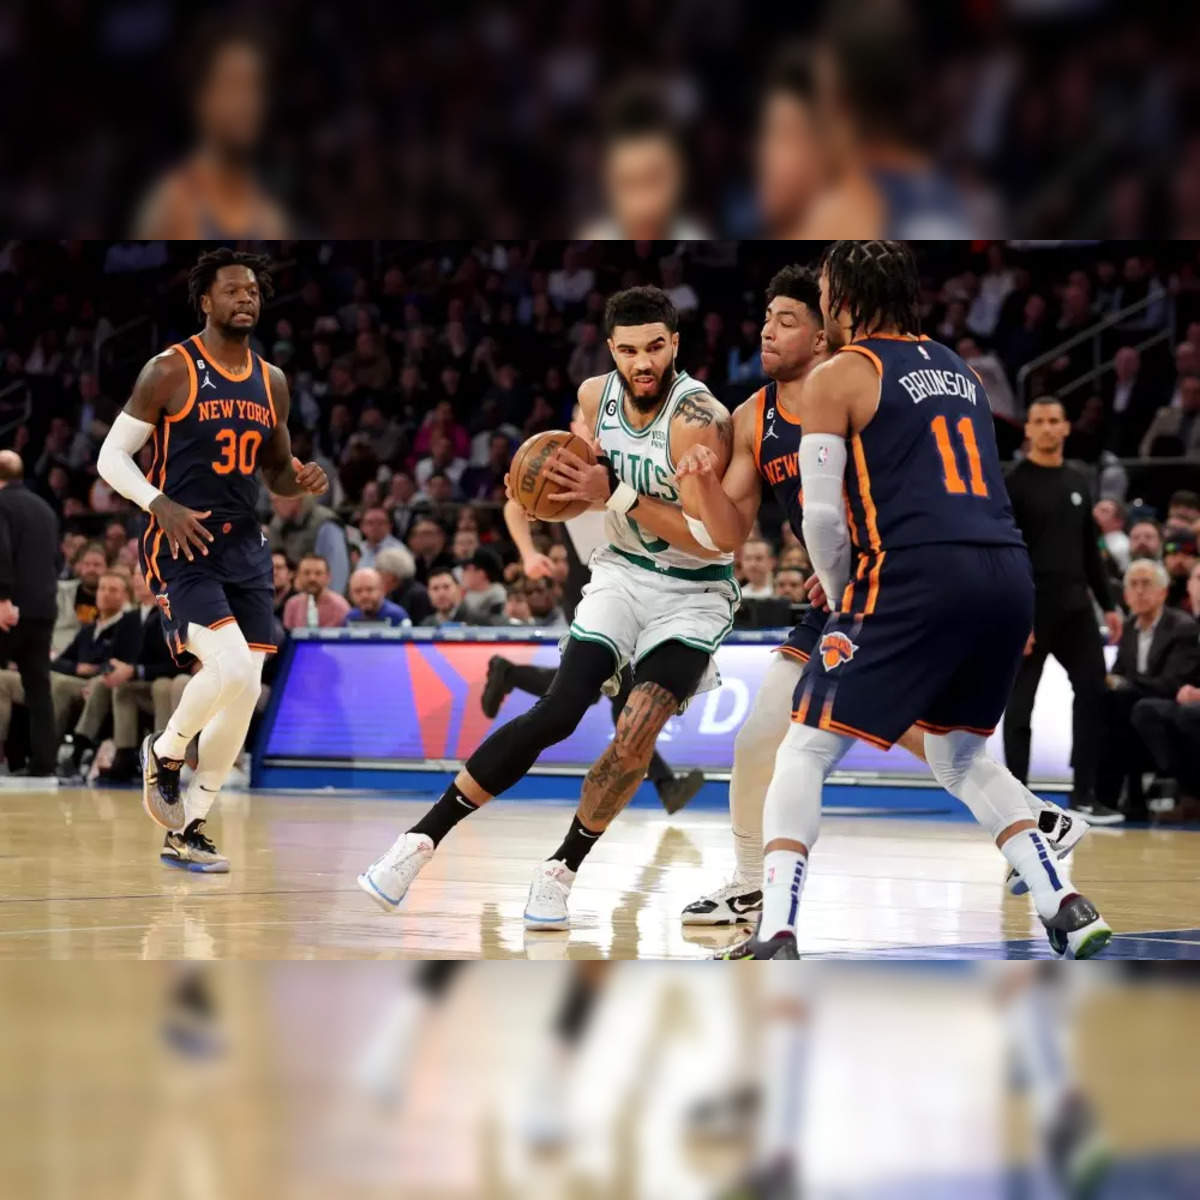 How to watch today's Celtics vs Knicks NBA game: Livestream, TV coverage,  kickoff time & radio station